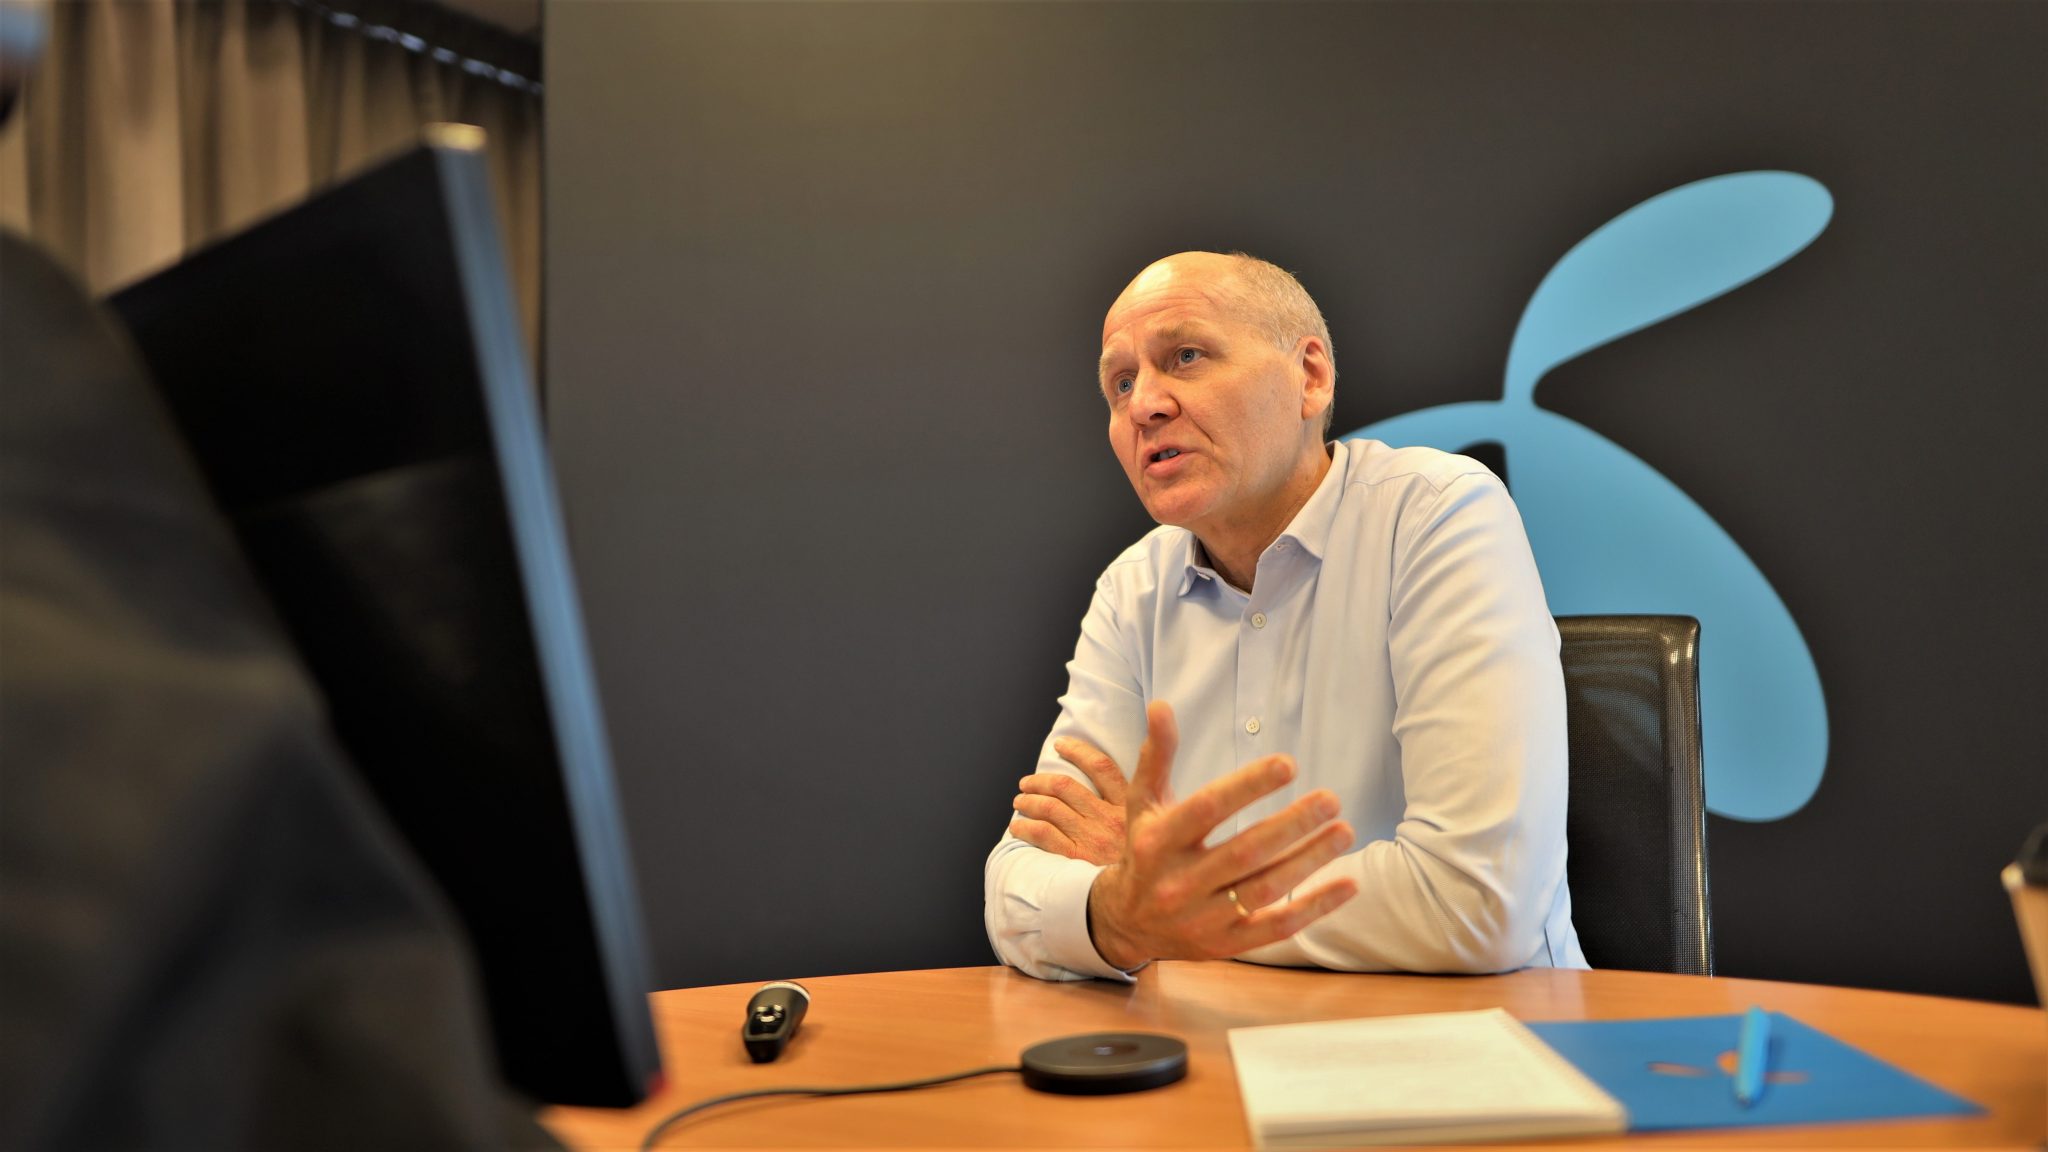 Telenor Group President and CEO, Sigve Brekke, during the online meeting